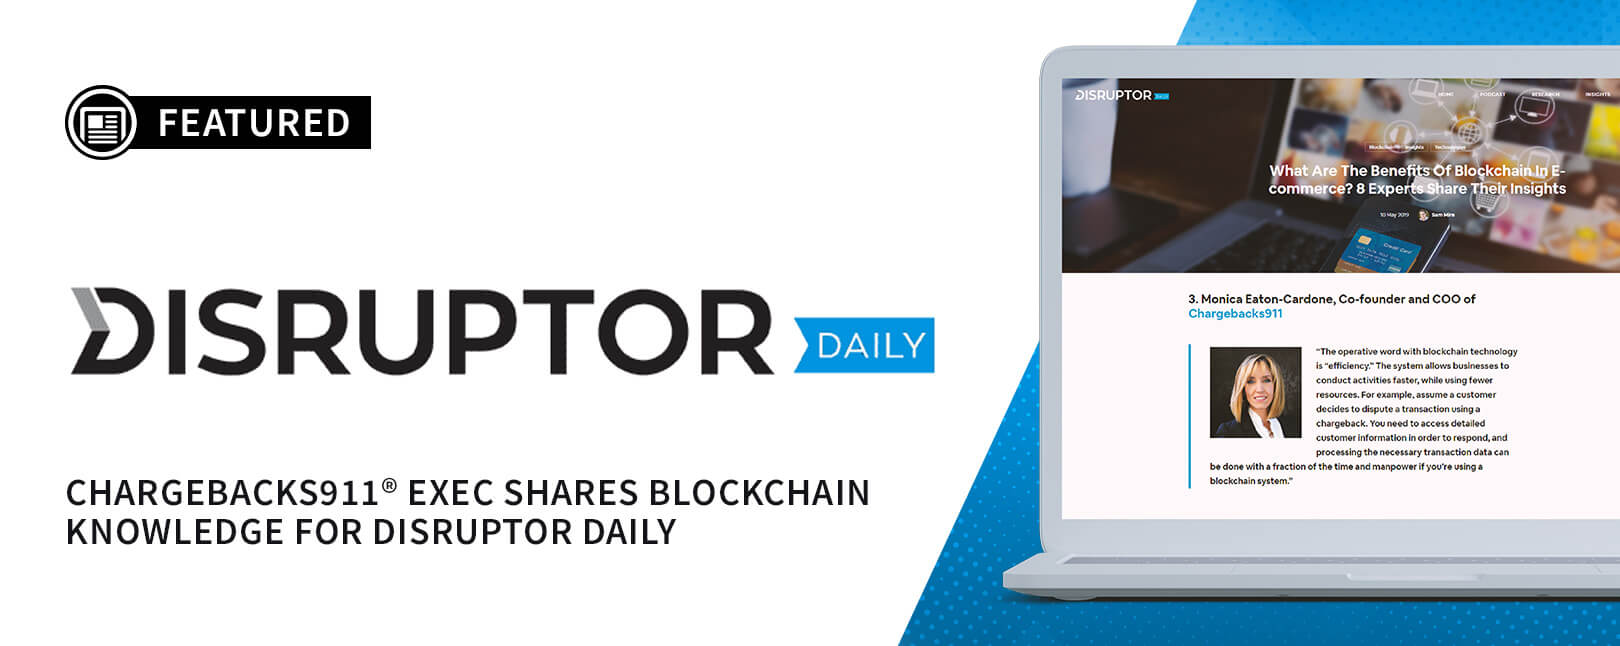 Chargebacks911® Exec Shares Blockchain Knowledge for Disruptor Daily